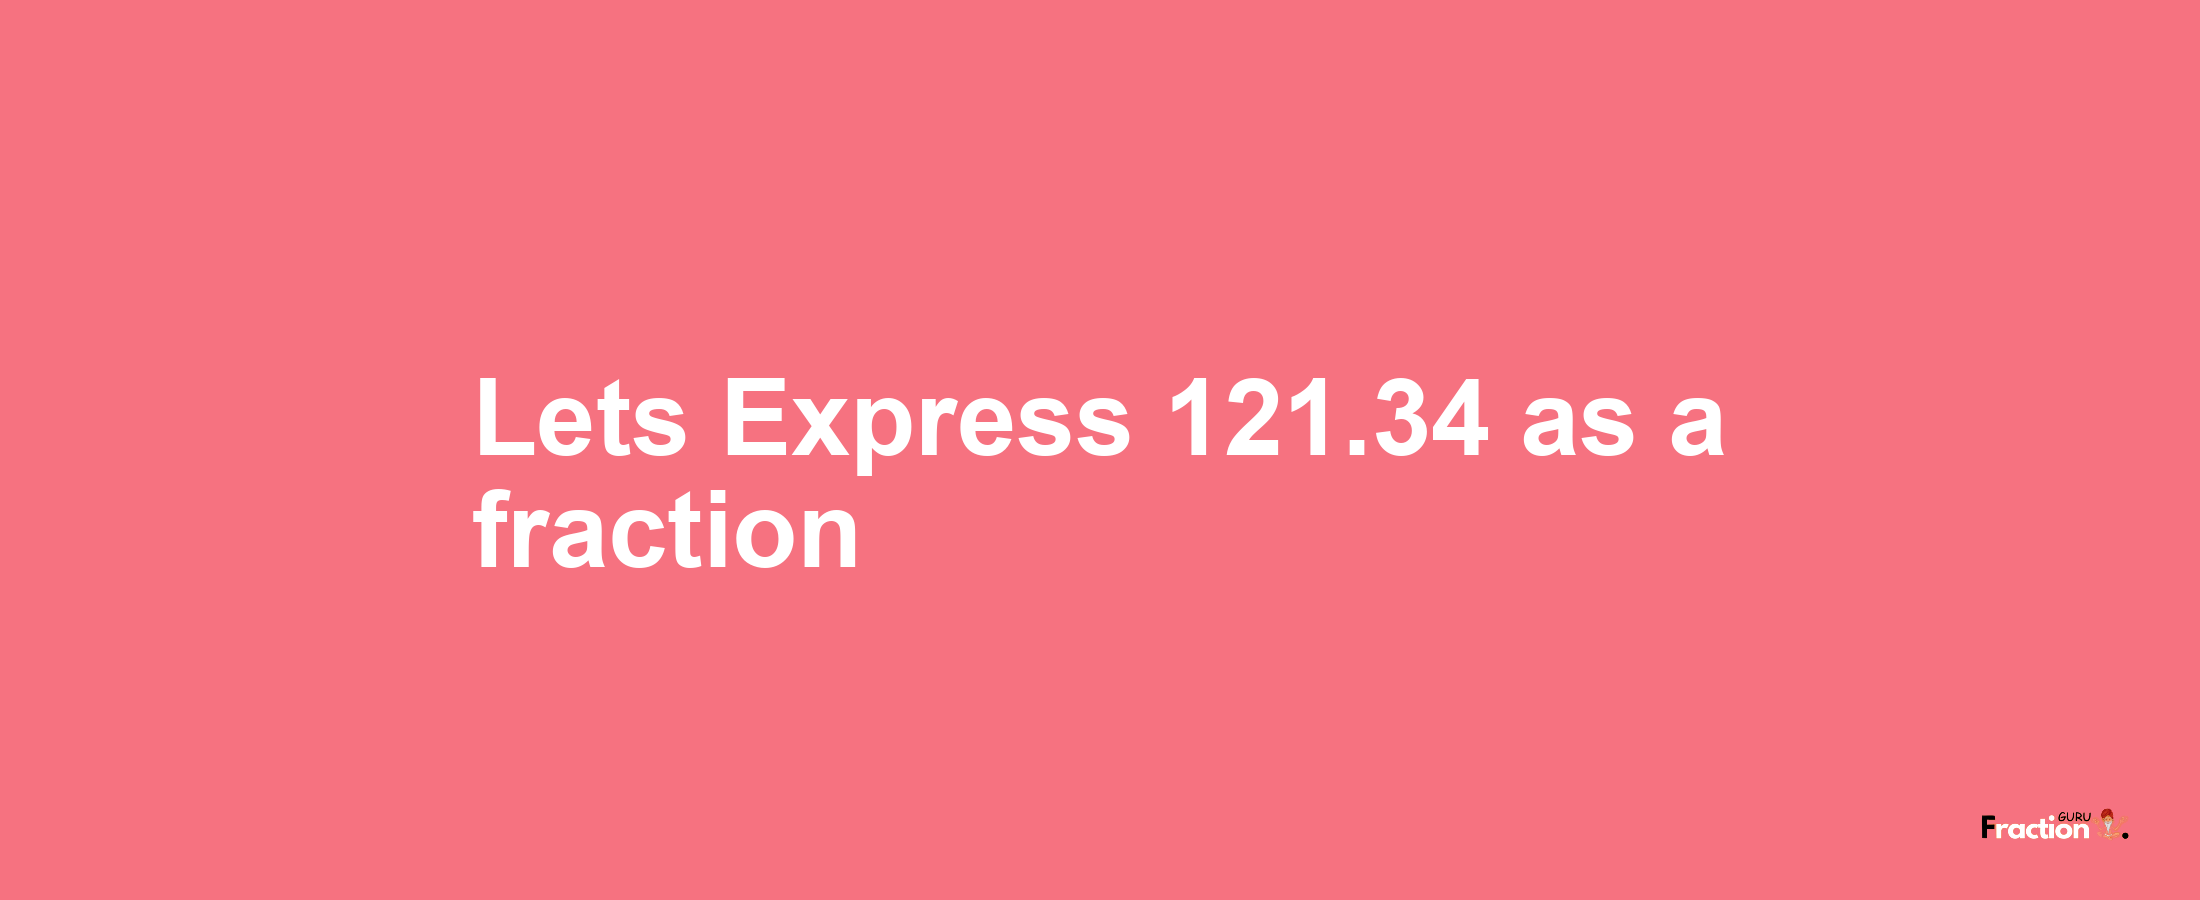 Lets Express 121.34 as afraction